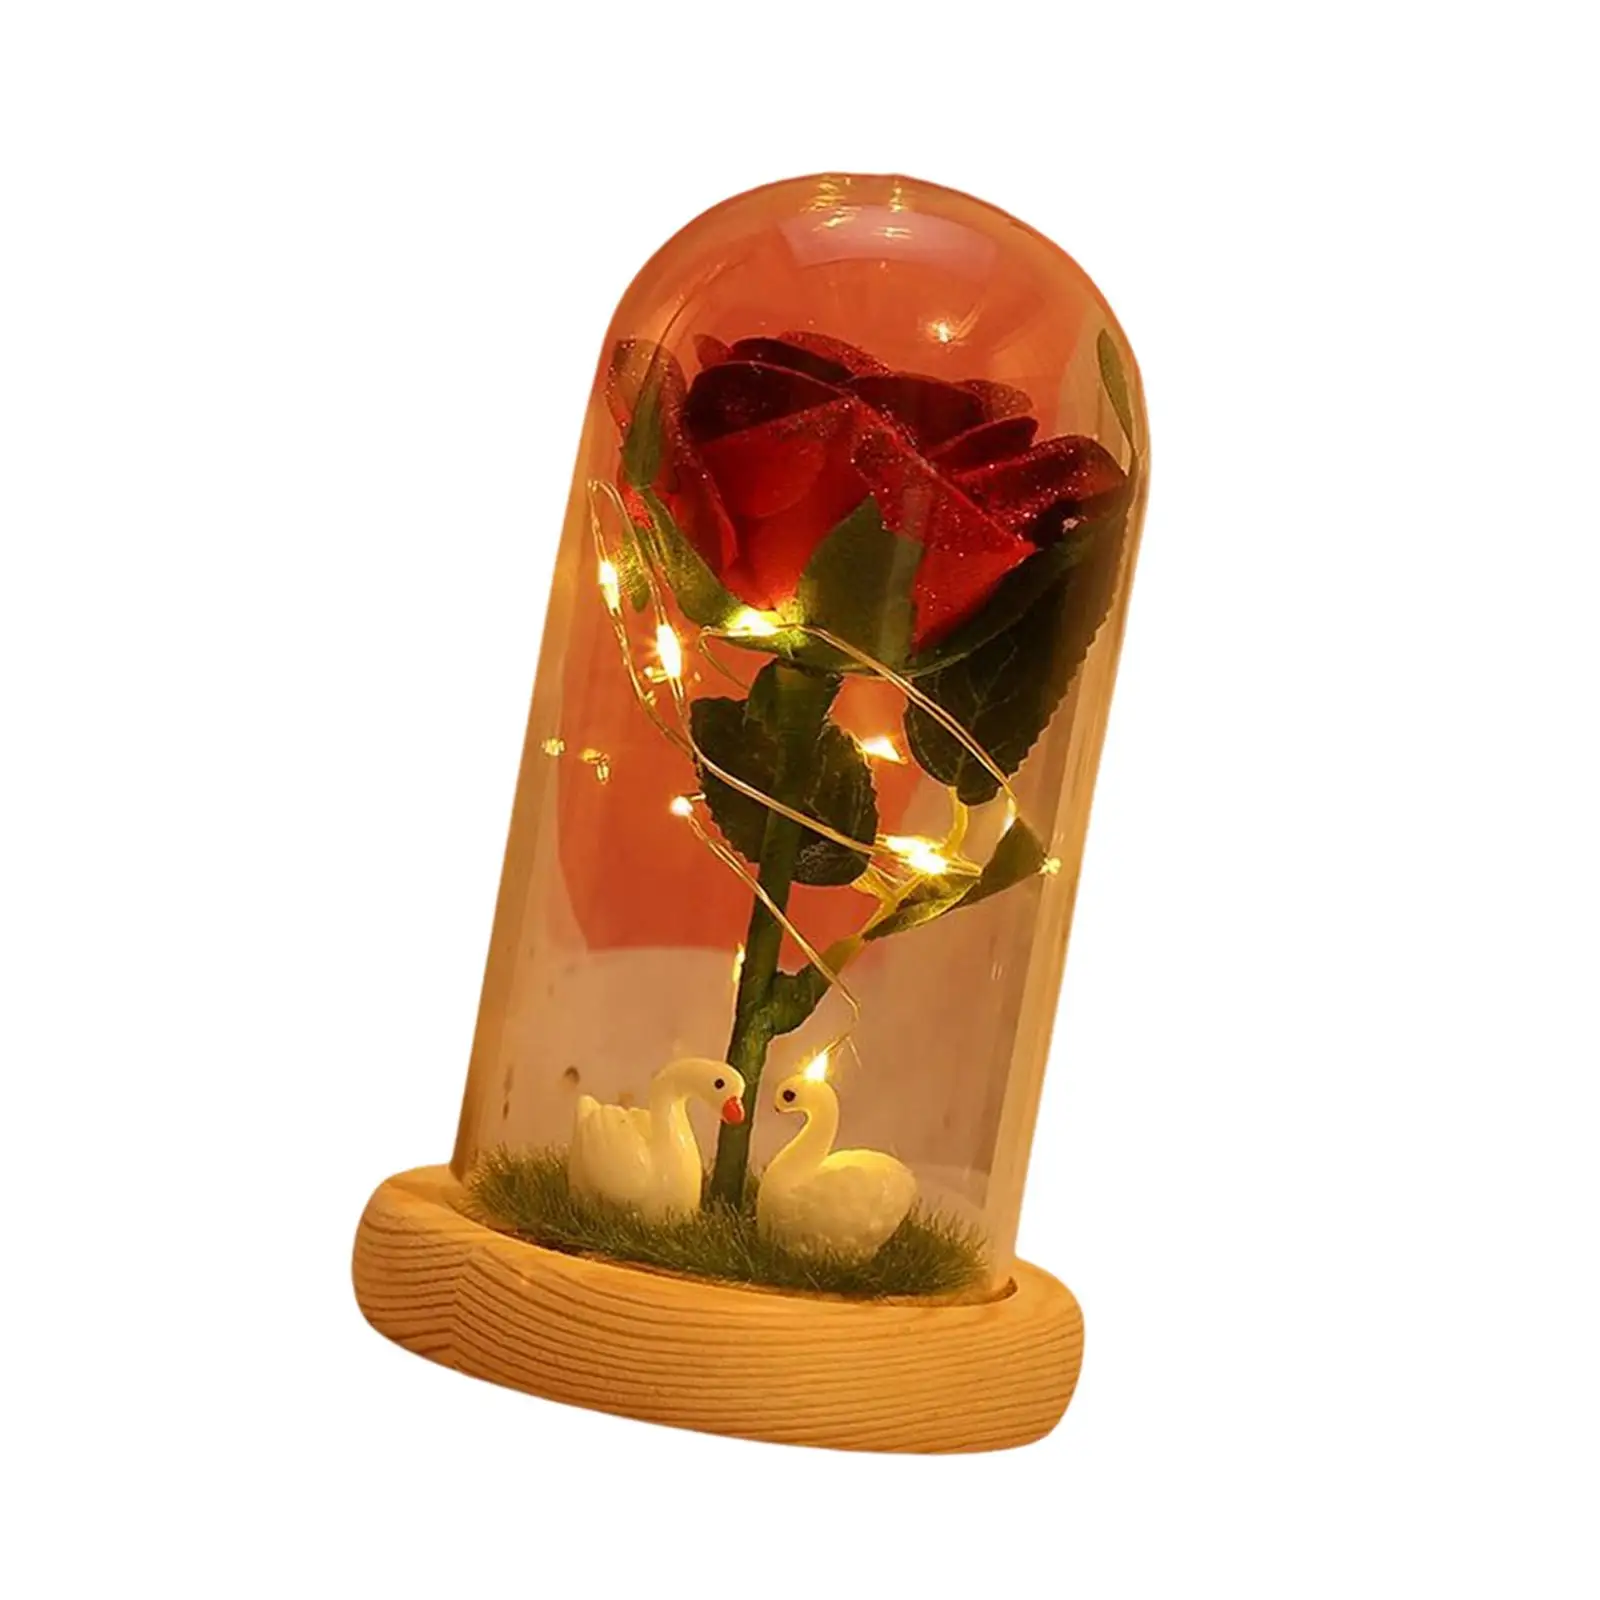 Romantic light with Base Arrangements Simulated Flowers Ornaments for Valentines Day Gift Home Decoration Girls